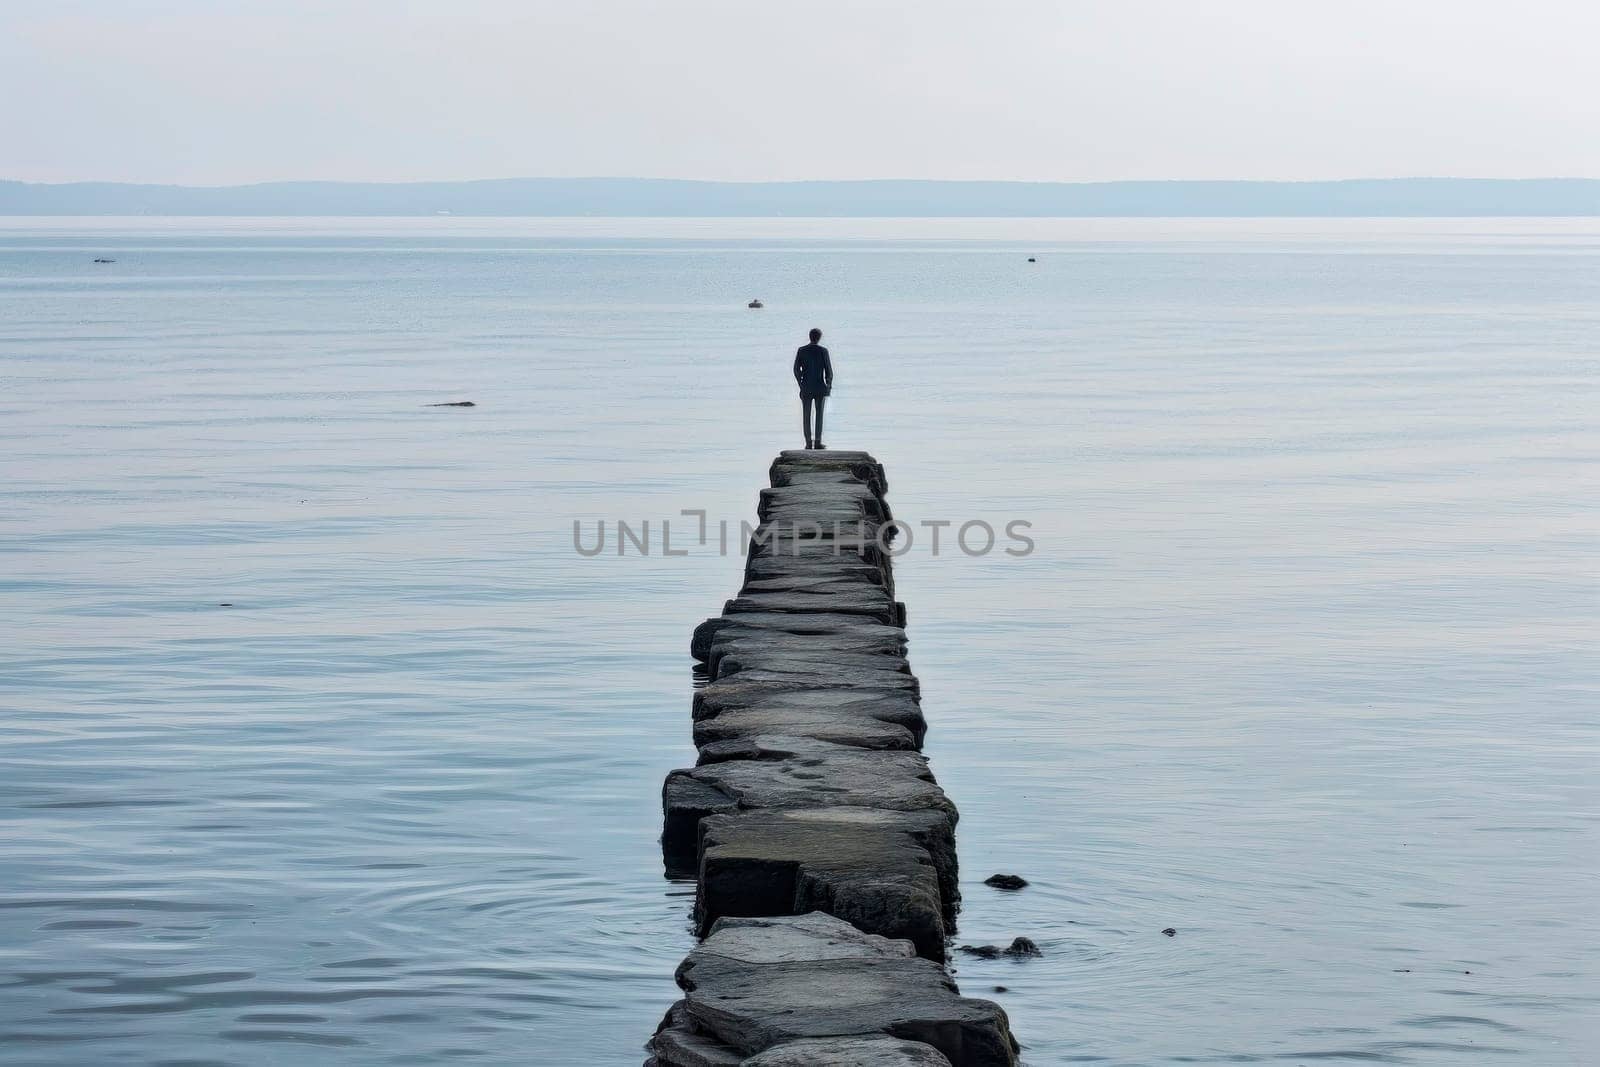 Wide shot capturing the serene silhouette of a lonely person on a sea pier.